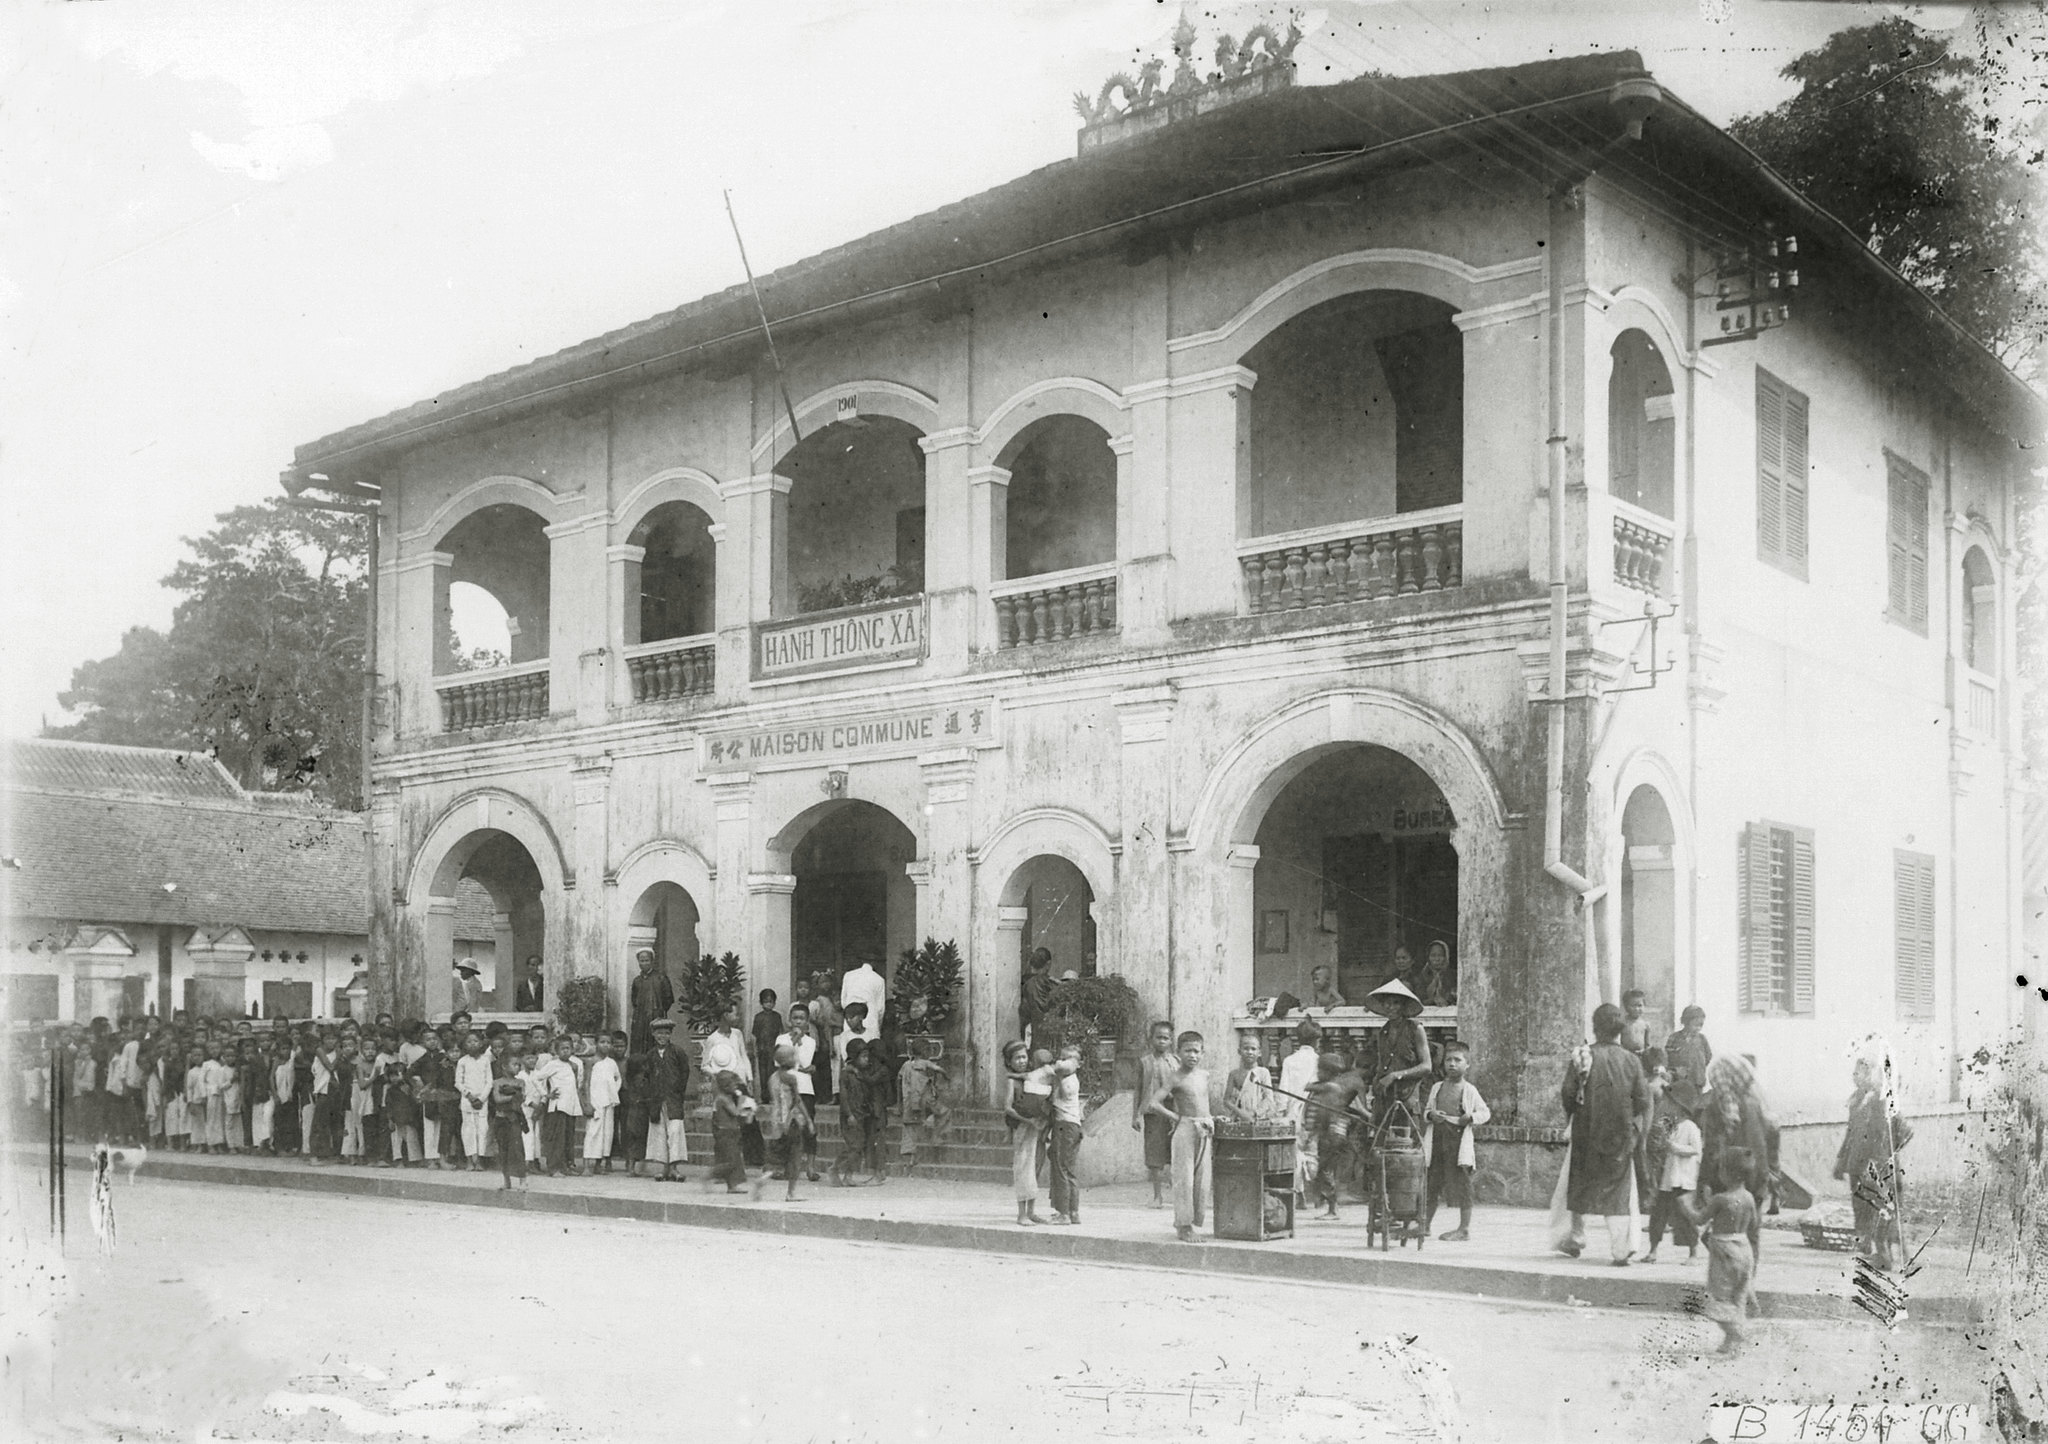 People got vaccinated in Gò Vấp during the French rule